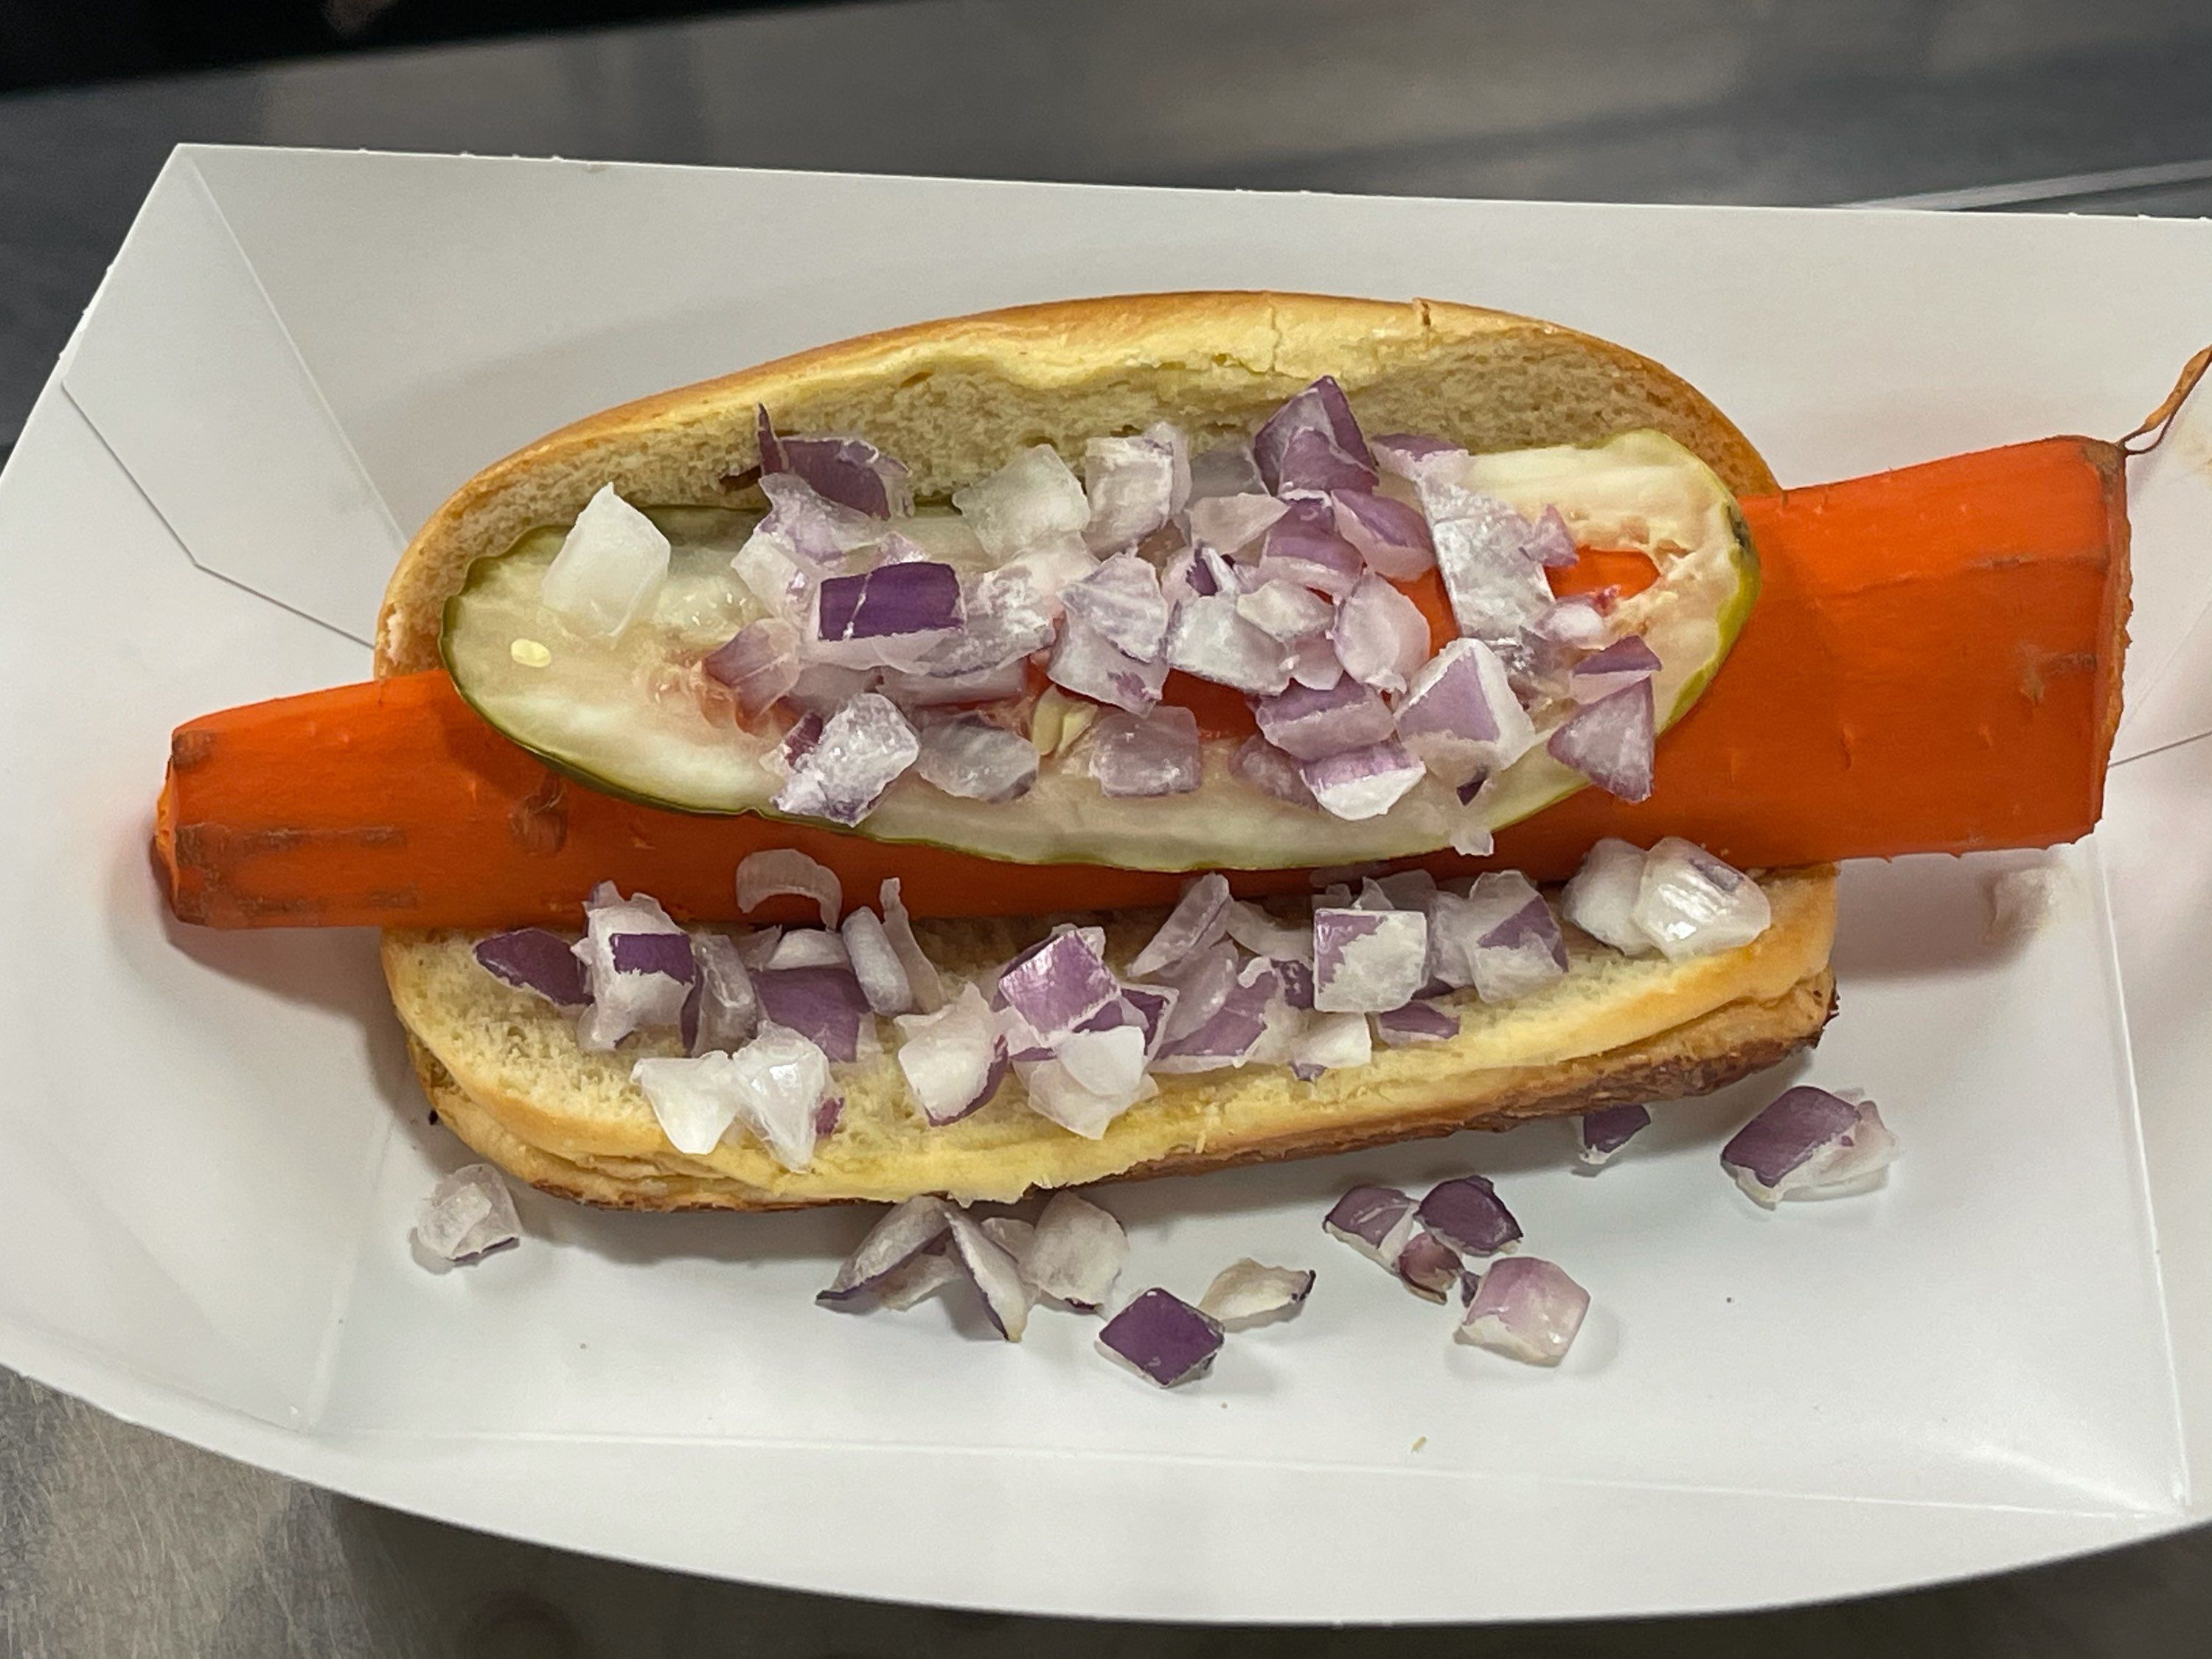 The cafeteria where my buddy work literally put a baked carrot on a bun and called it a veggie hotdog the other day